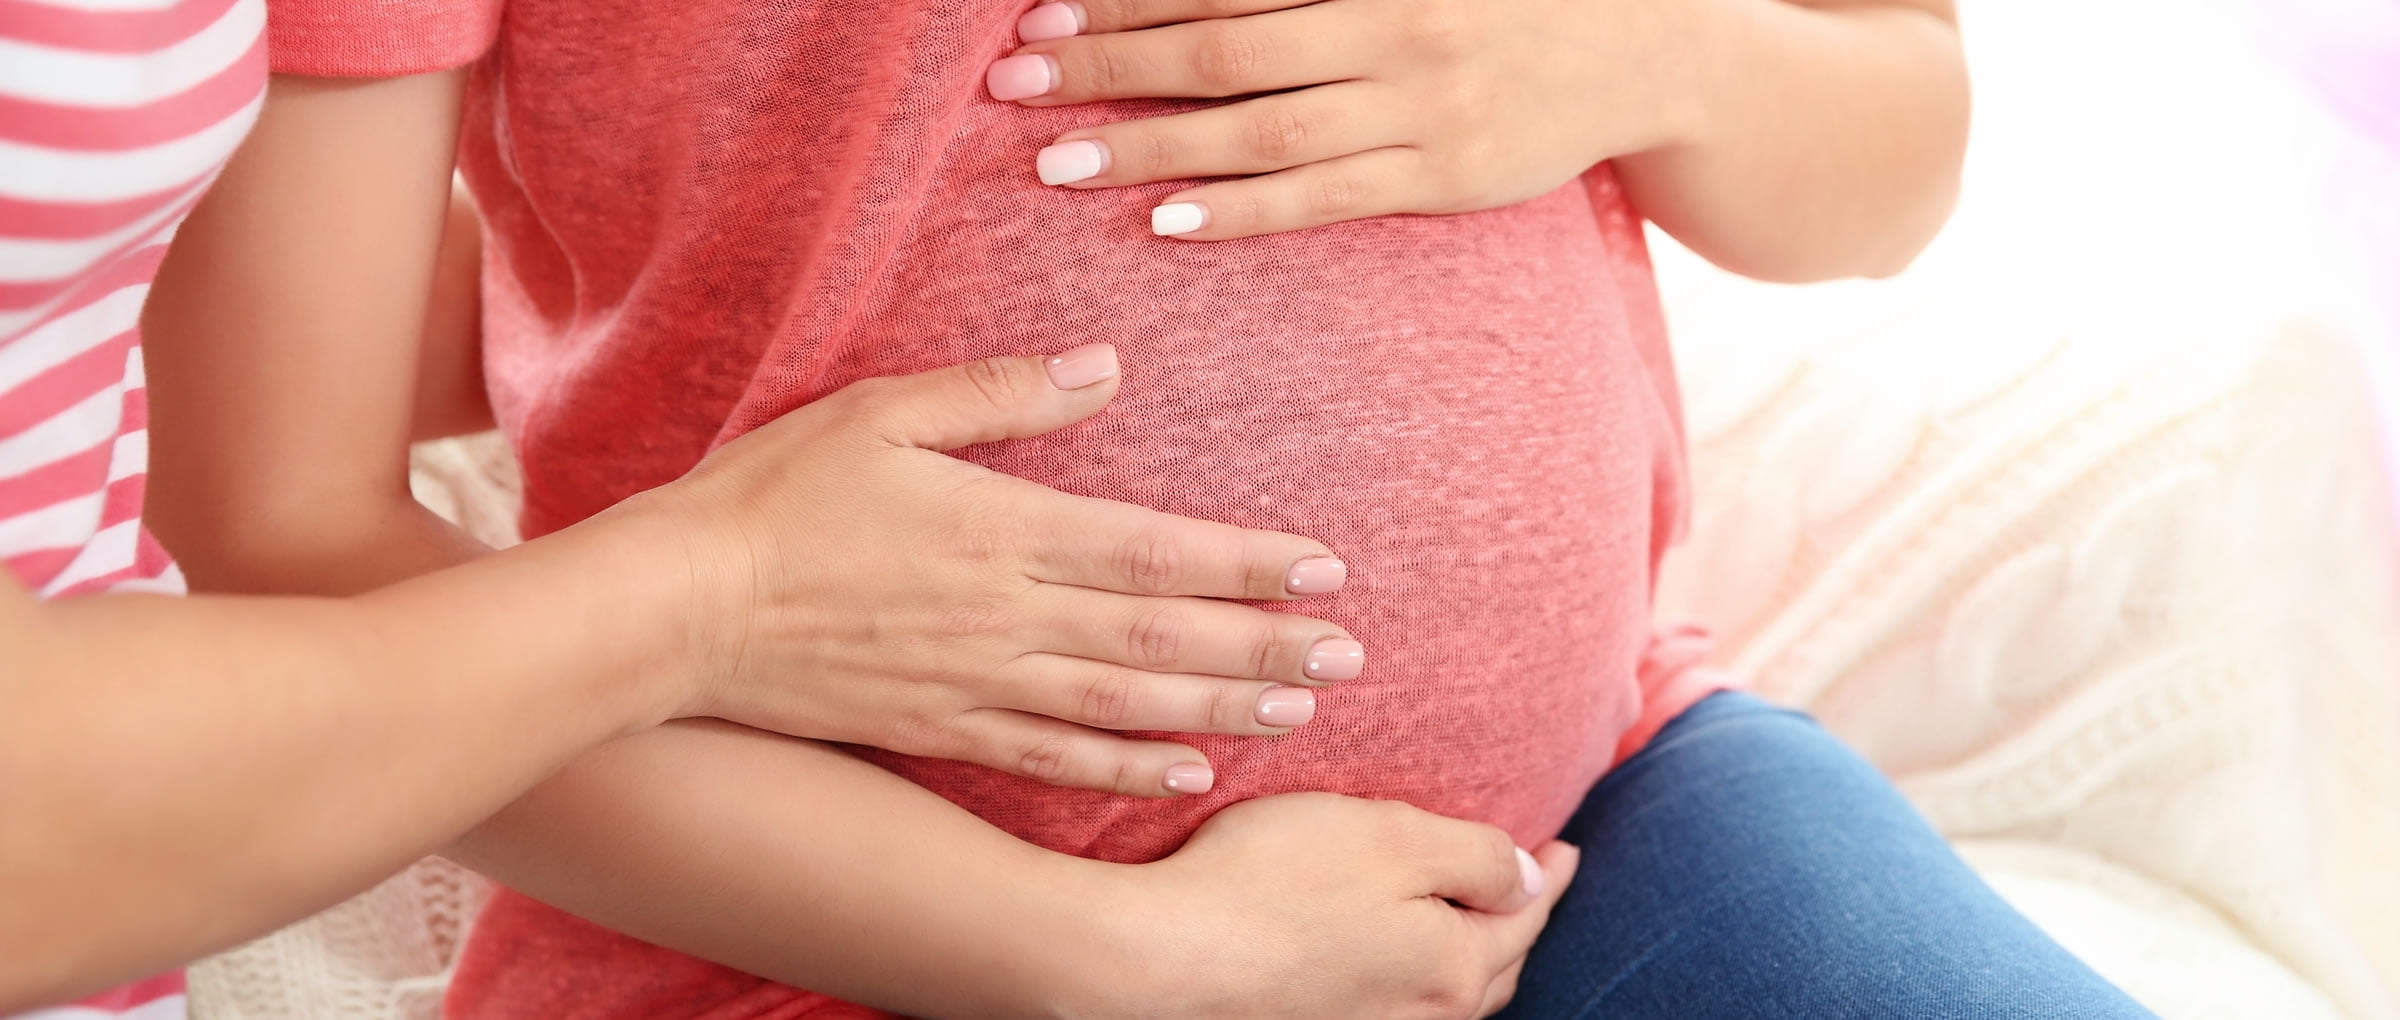 Pregnancy follow-up in surrogacy